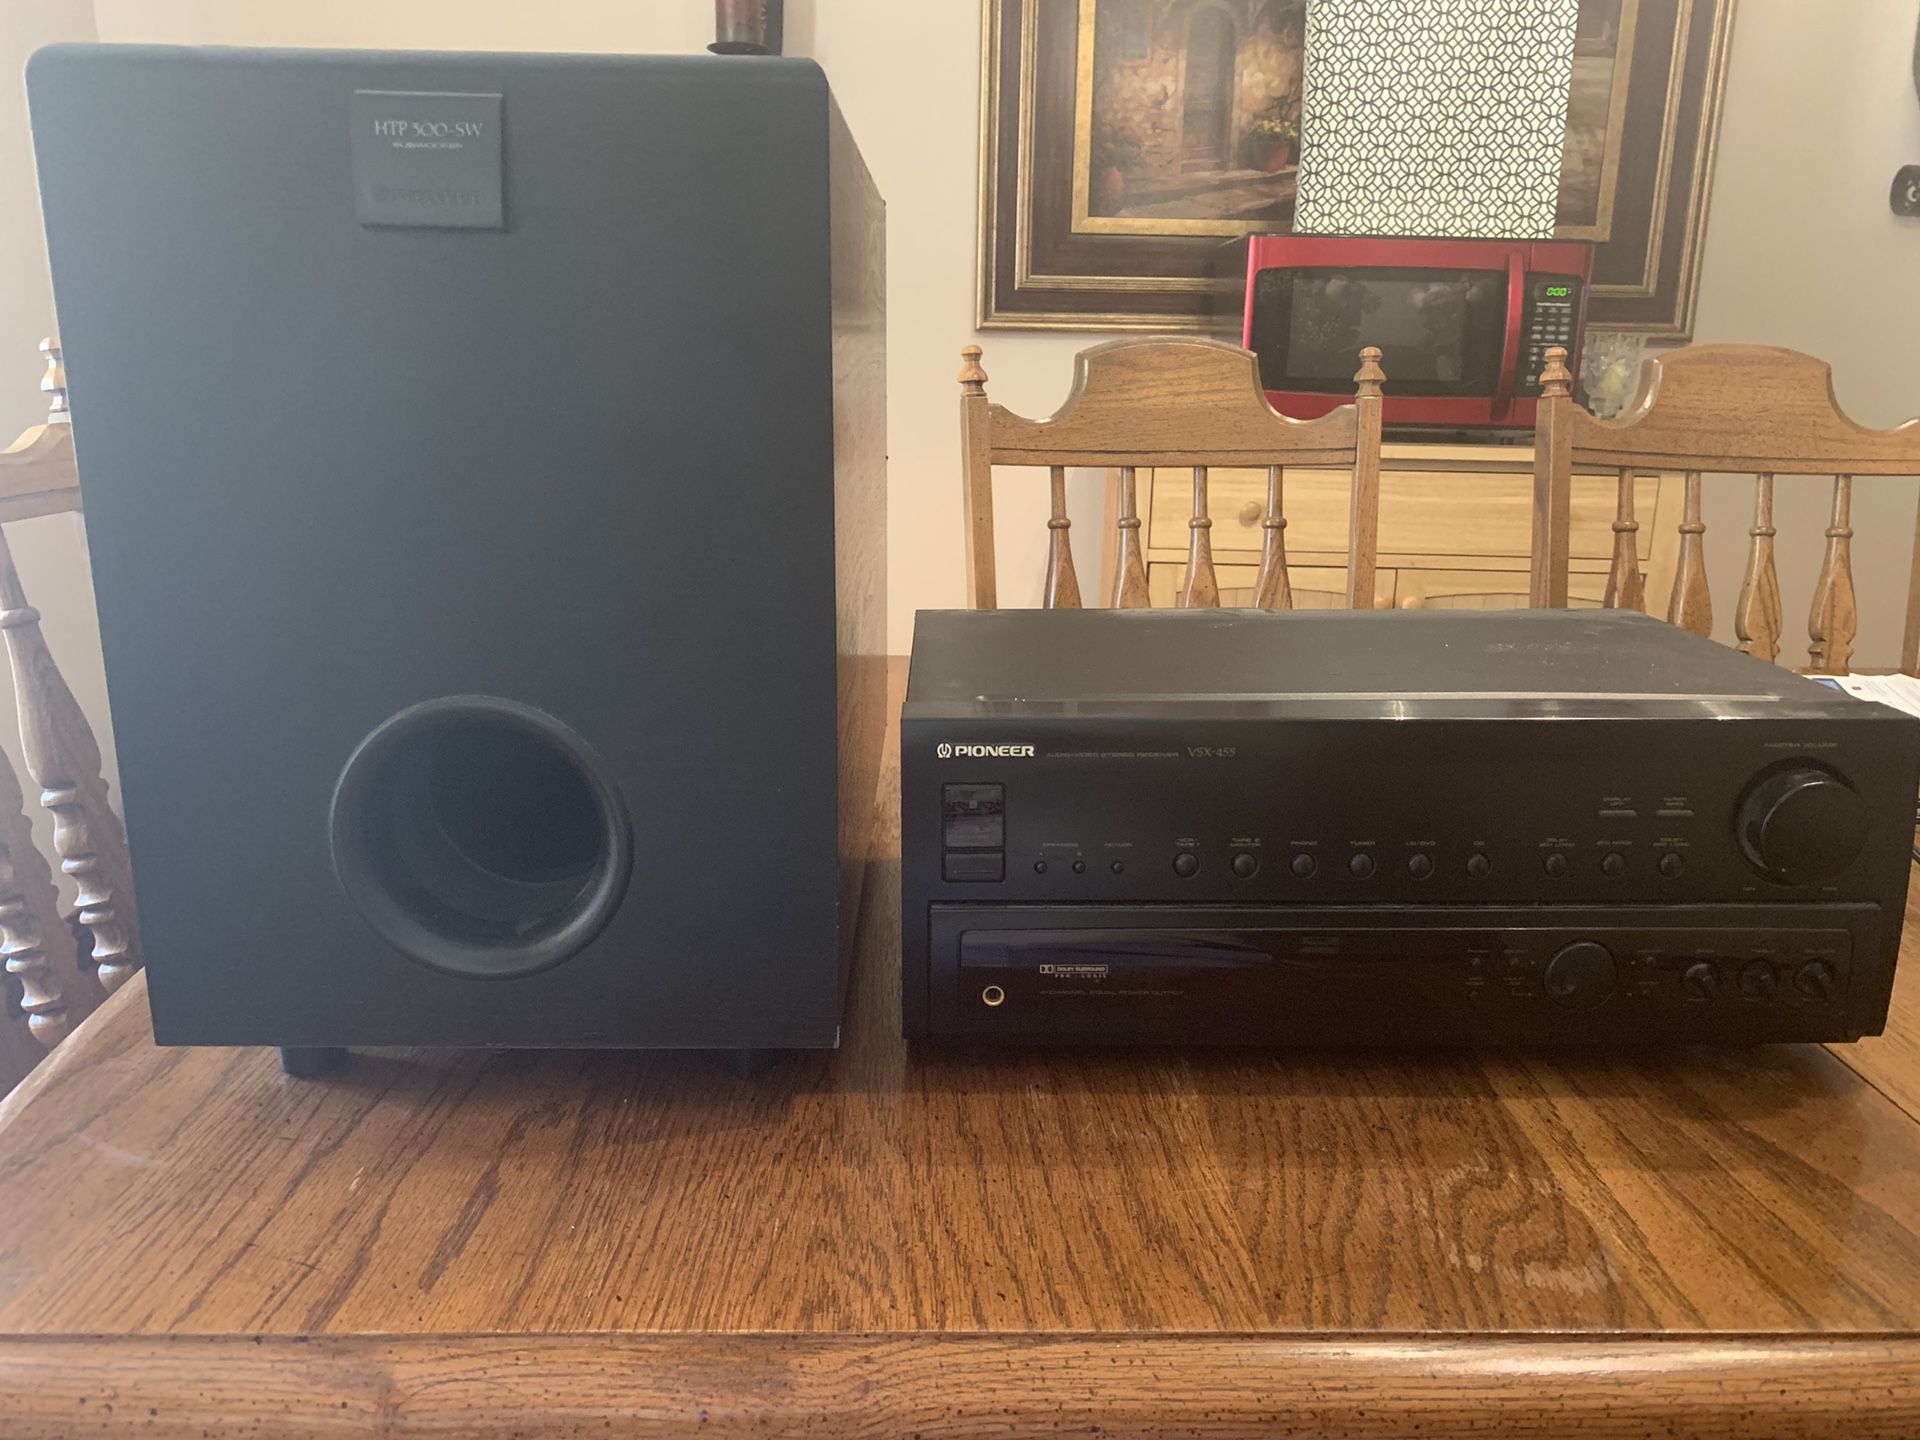 Vintage 1996 Pioneer VSX - 455 Dolby Pro Logic 5.1 Surround Sound Audio/Video Stereo Receiver & Pioneer HTP 300-SW subwoofer.